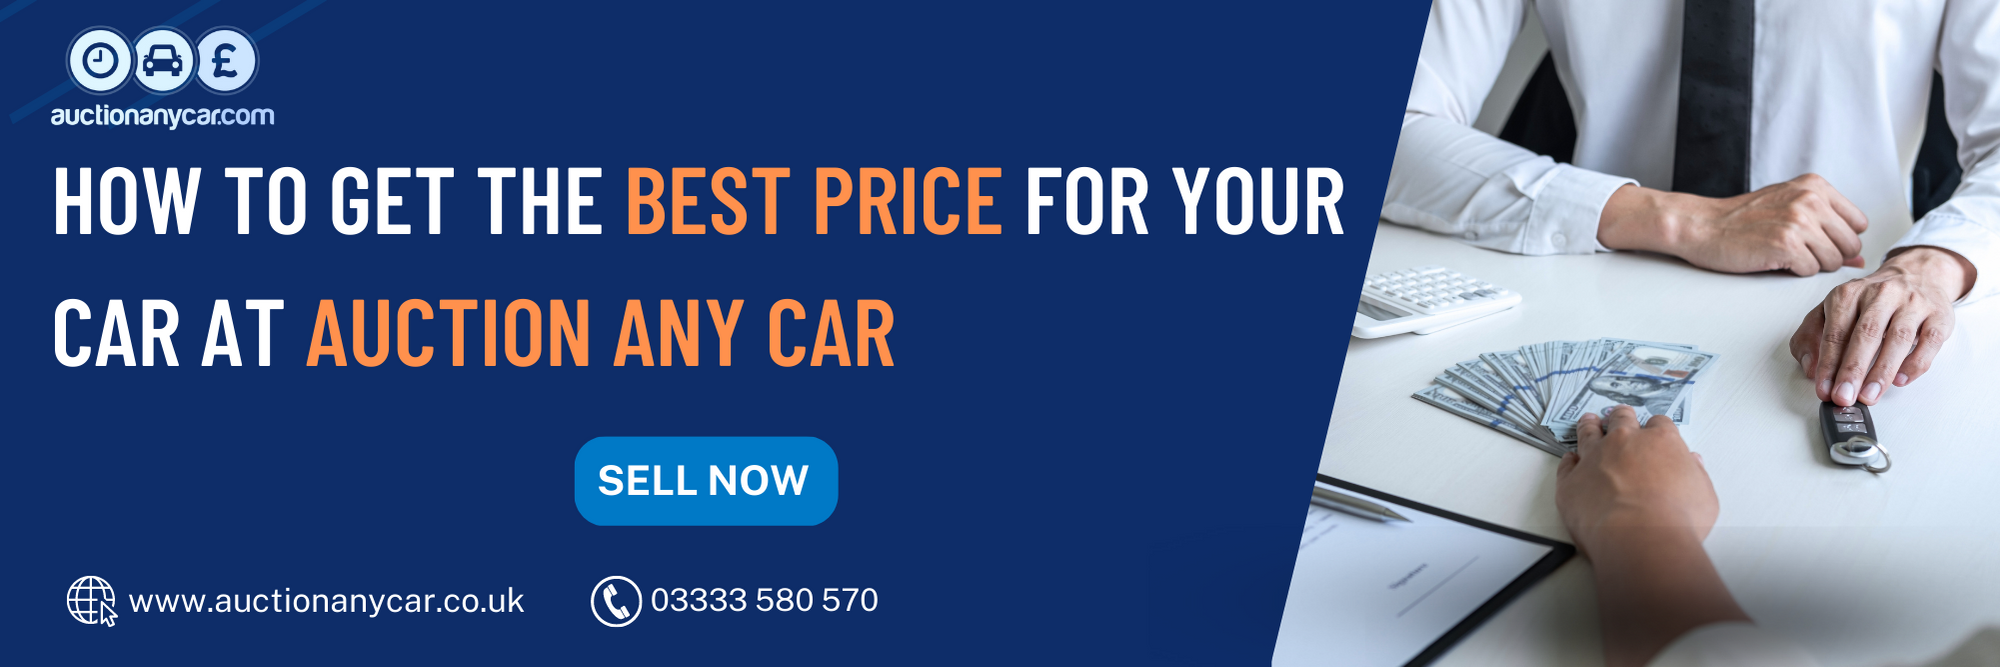 How to Get the Best Price for Your Car at Auction Any Car